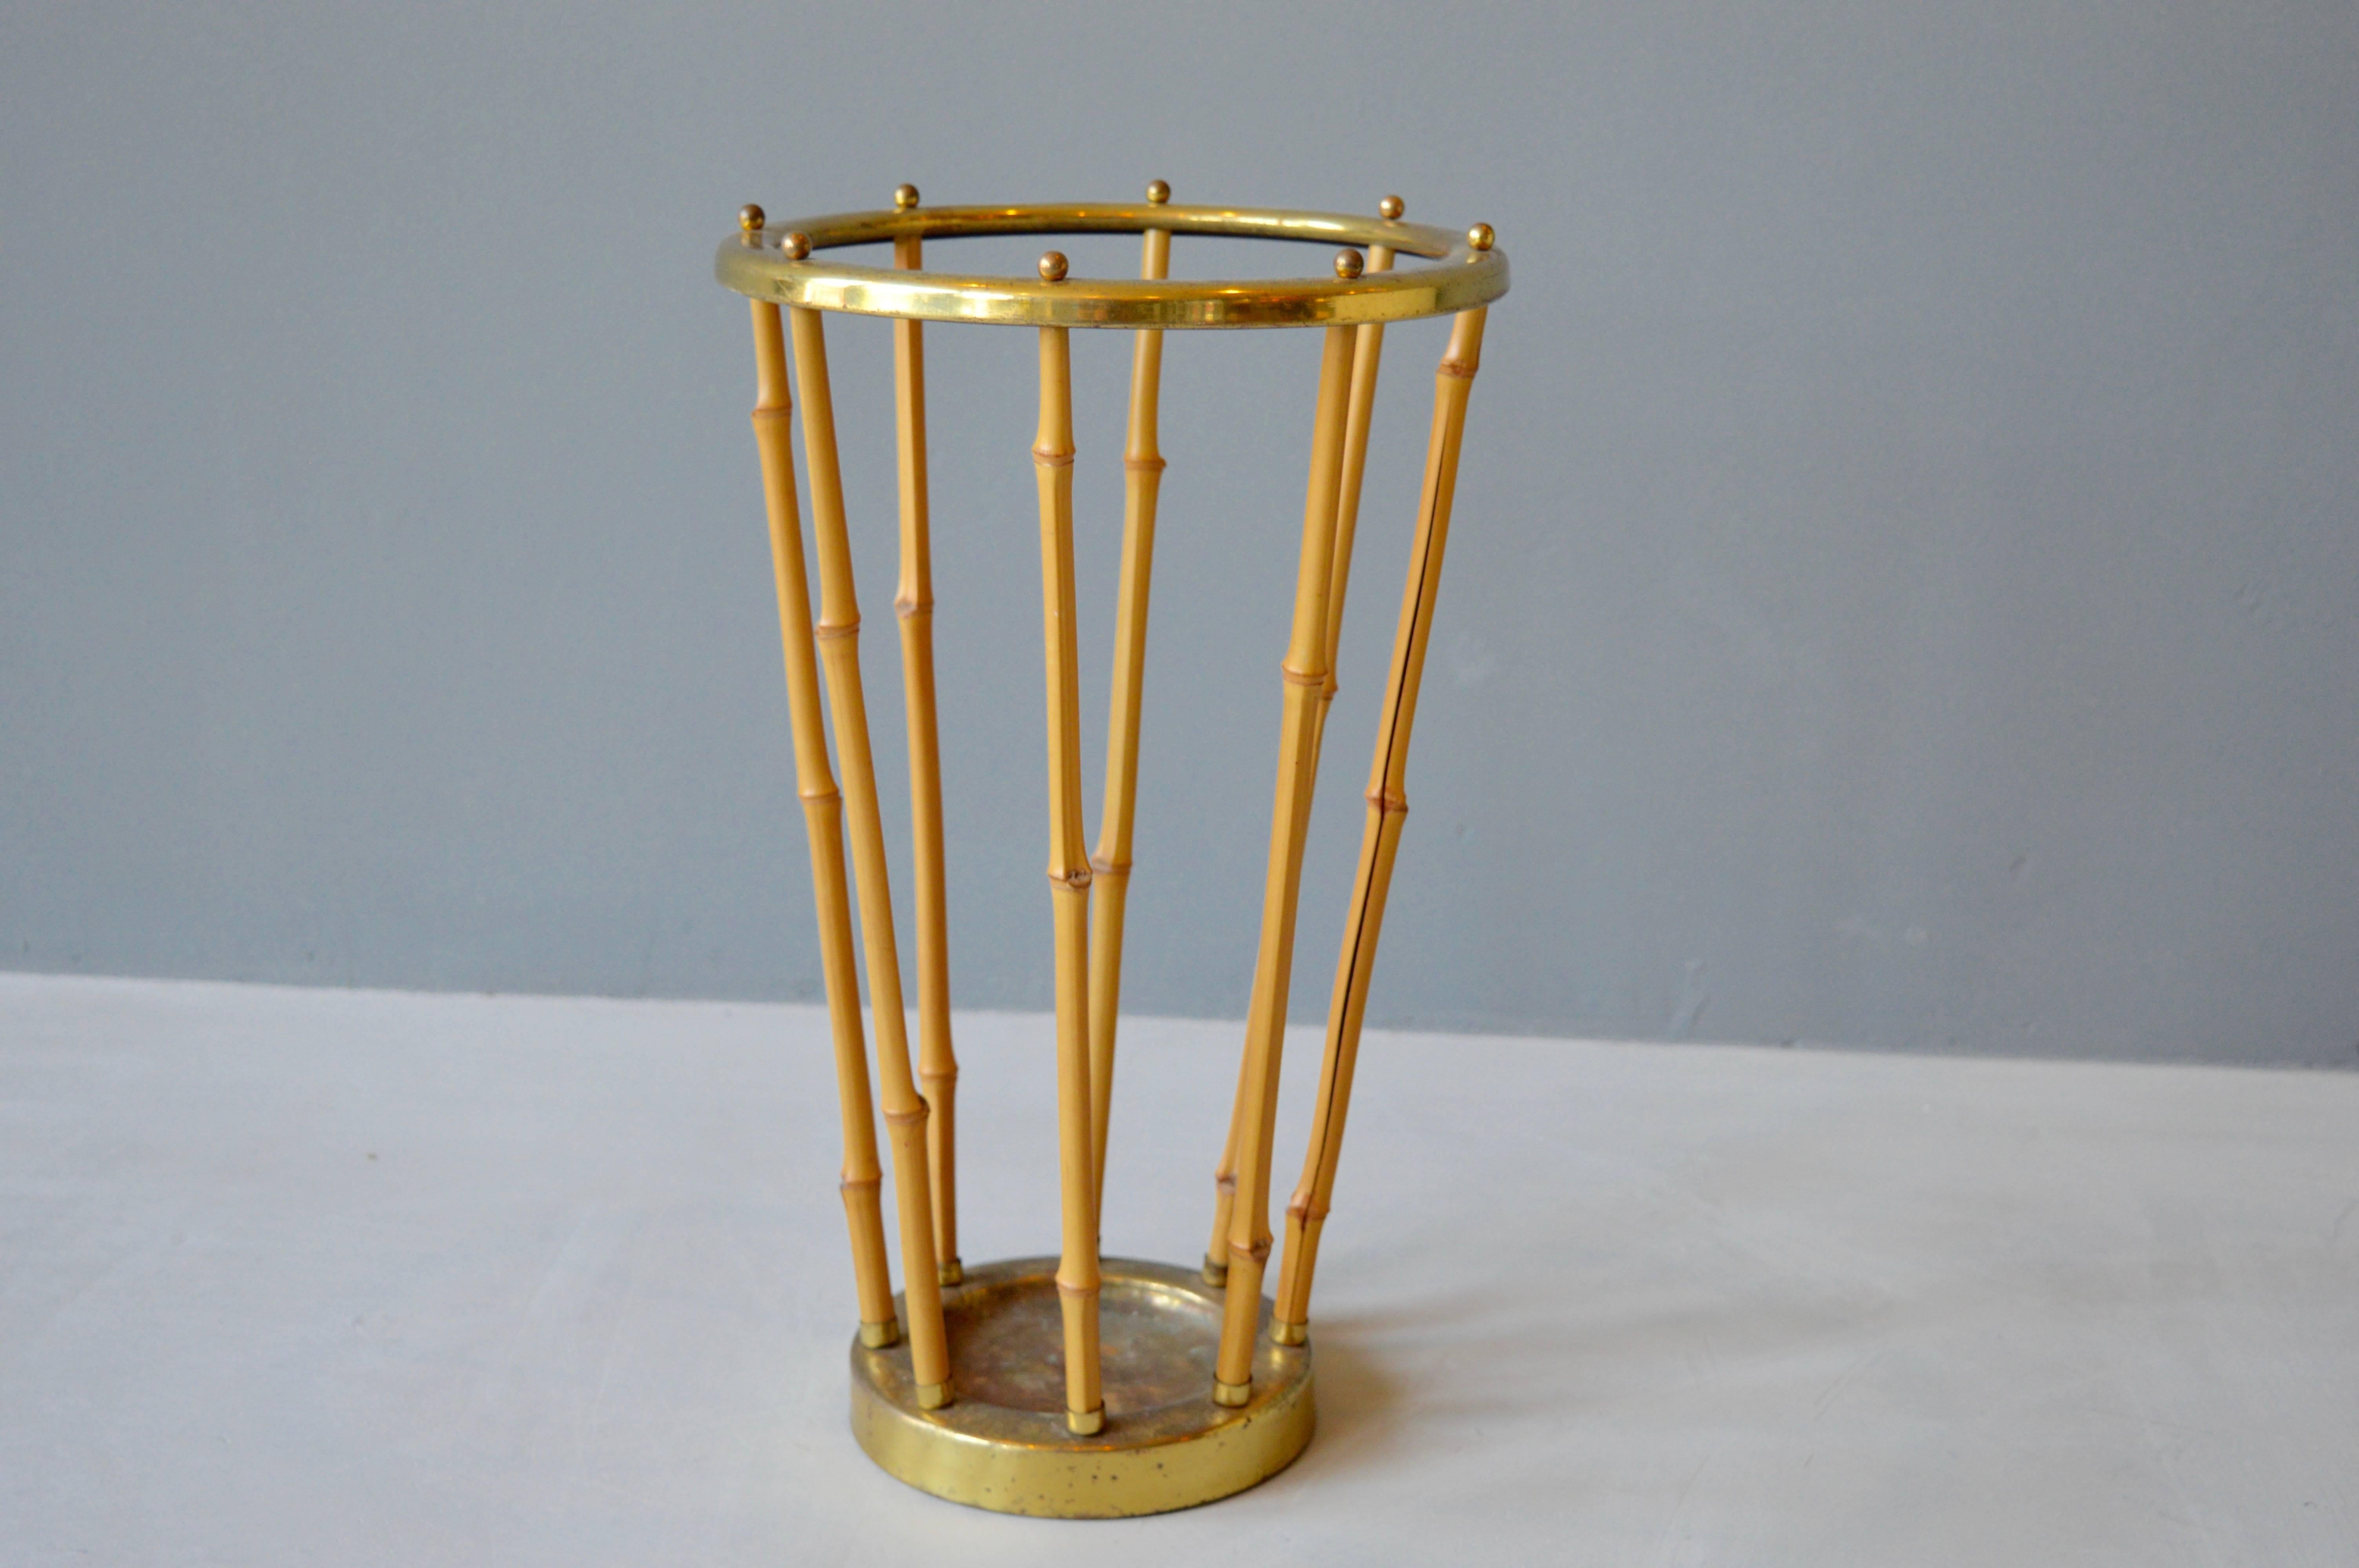 Handsome French umbrella stand made of brass and bamboo. Great original patina to brass. Very good vintage condition.